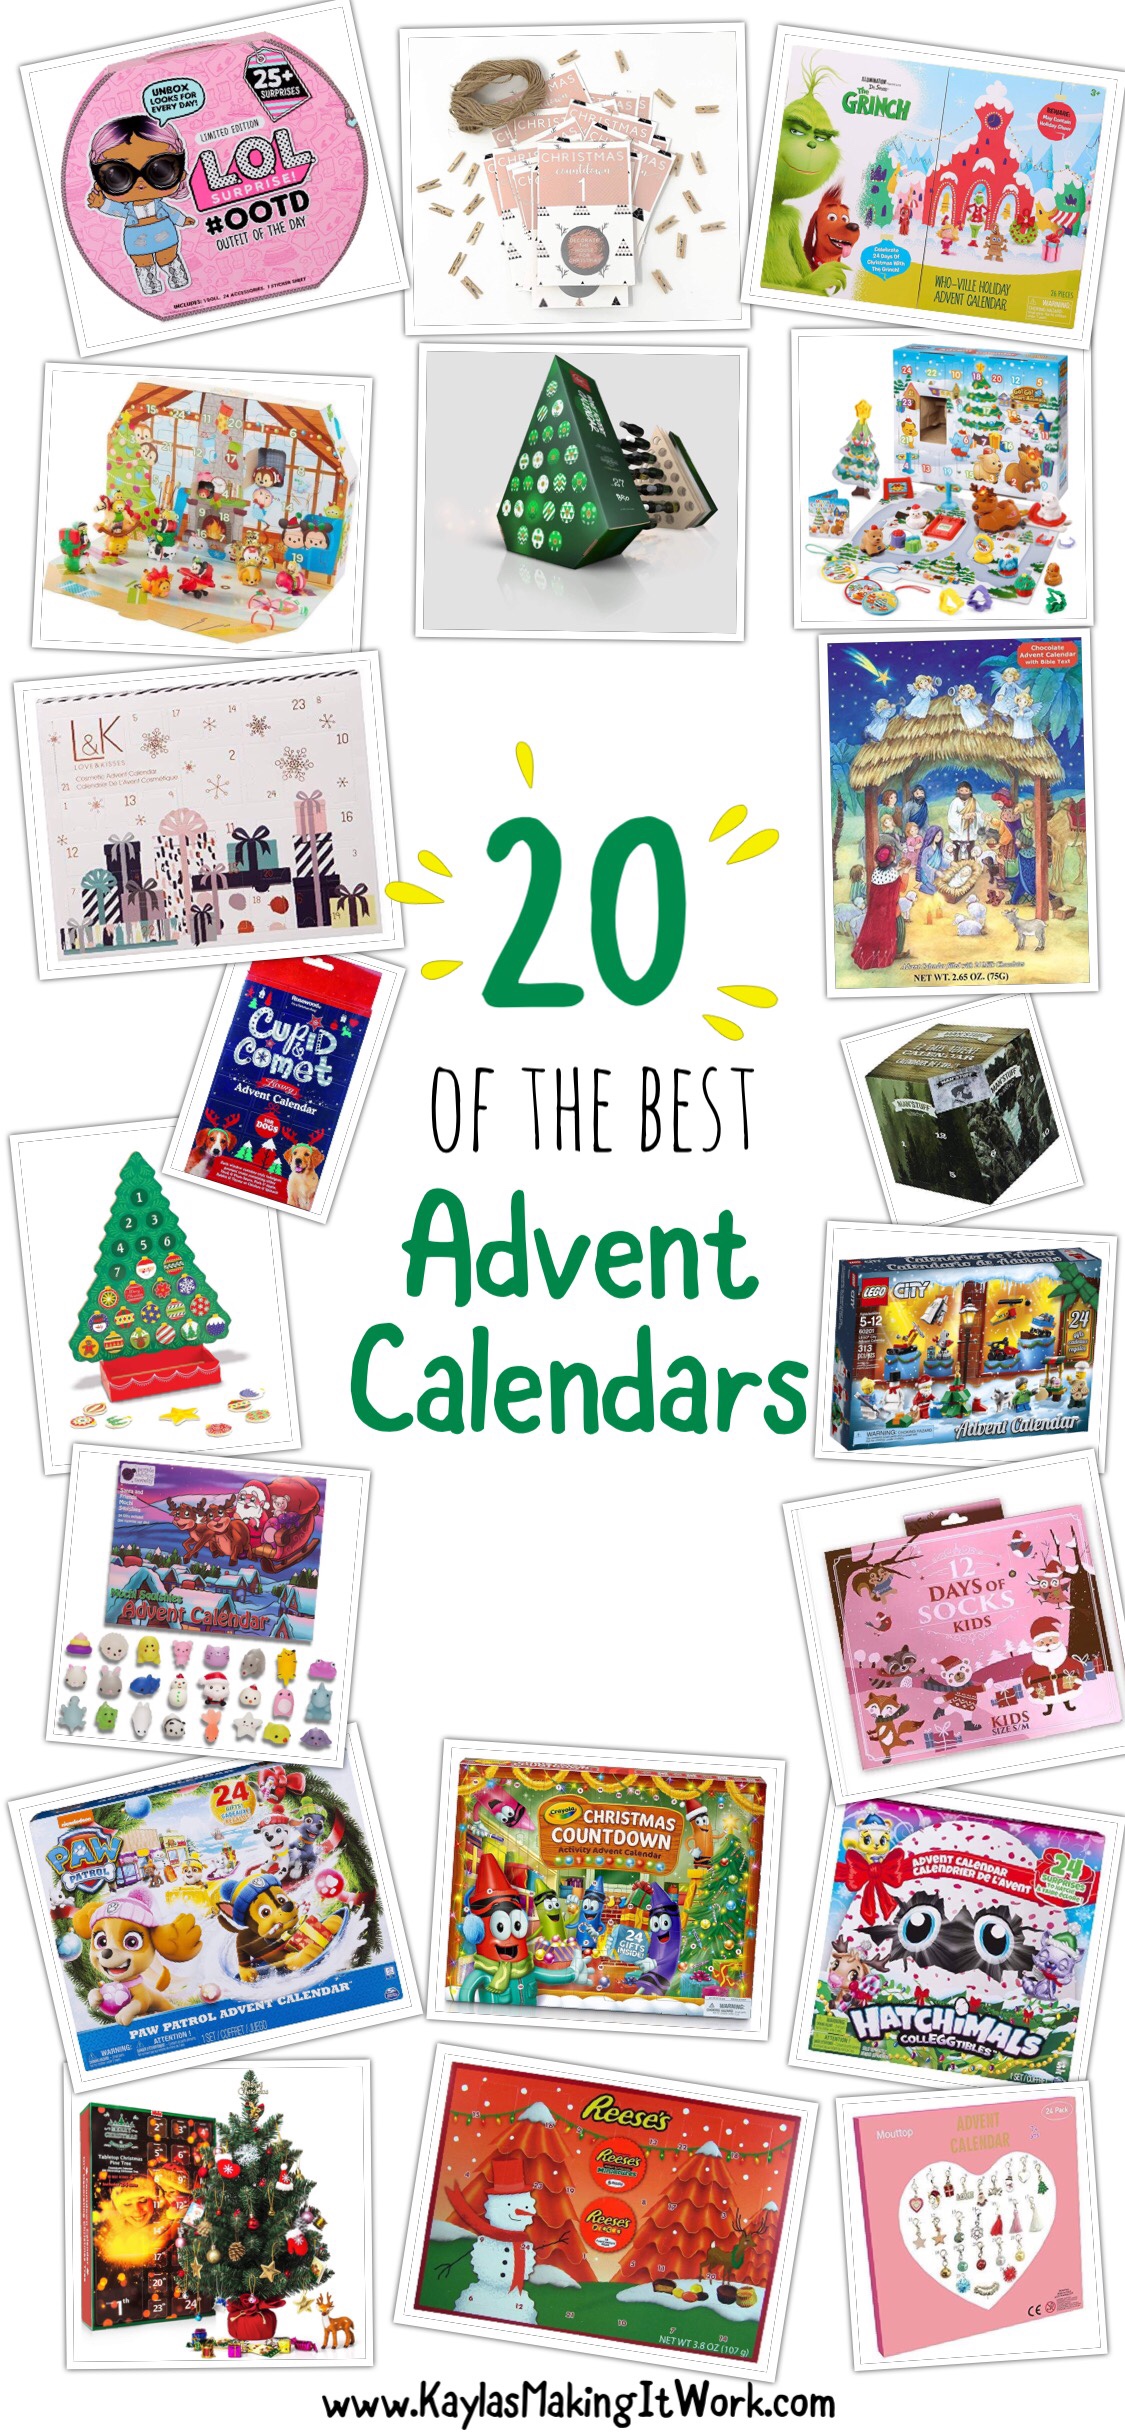 20 Of The Best Advent Calendars Kayla's